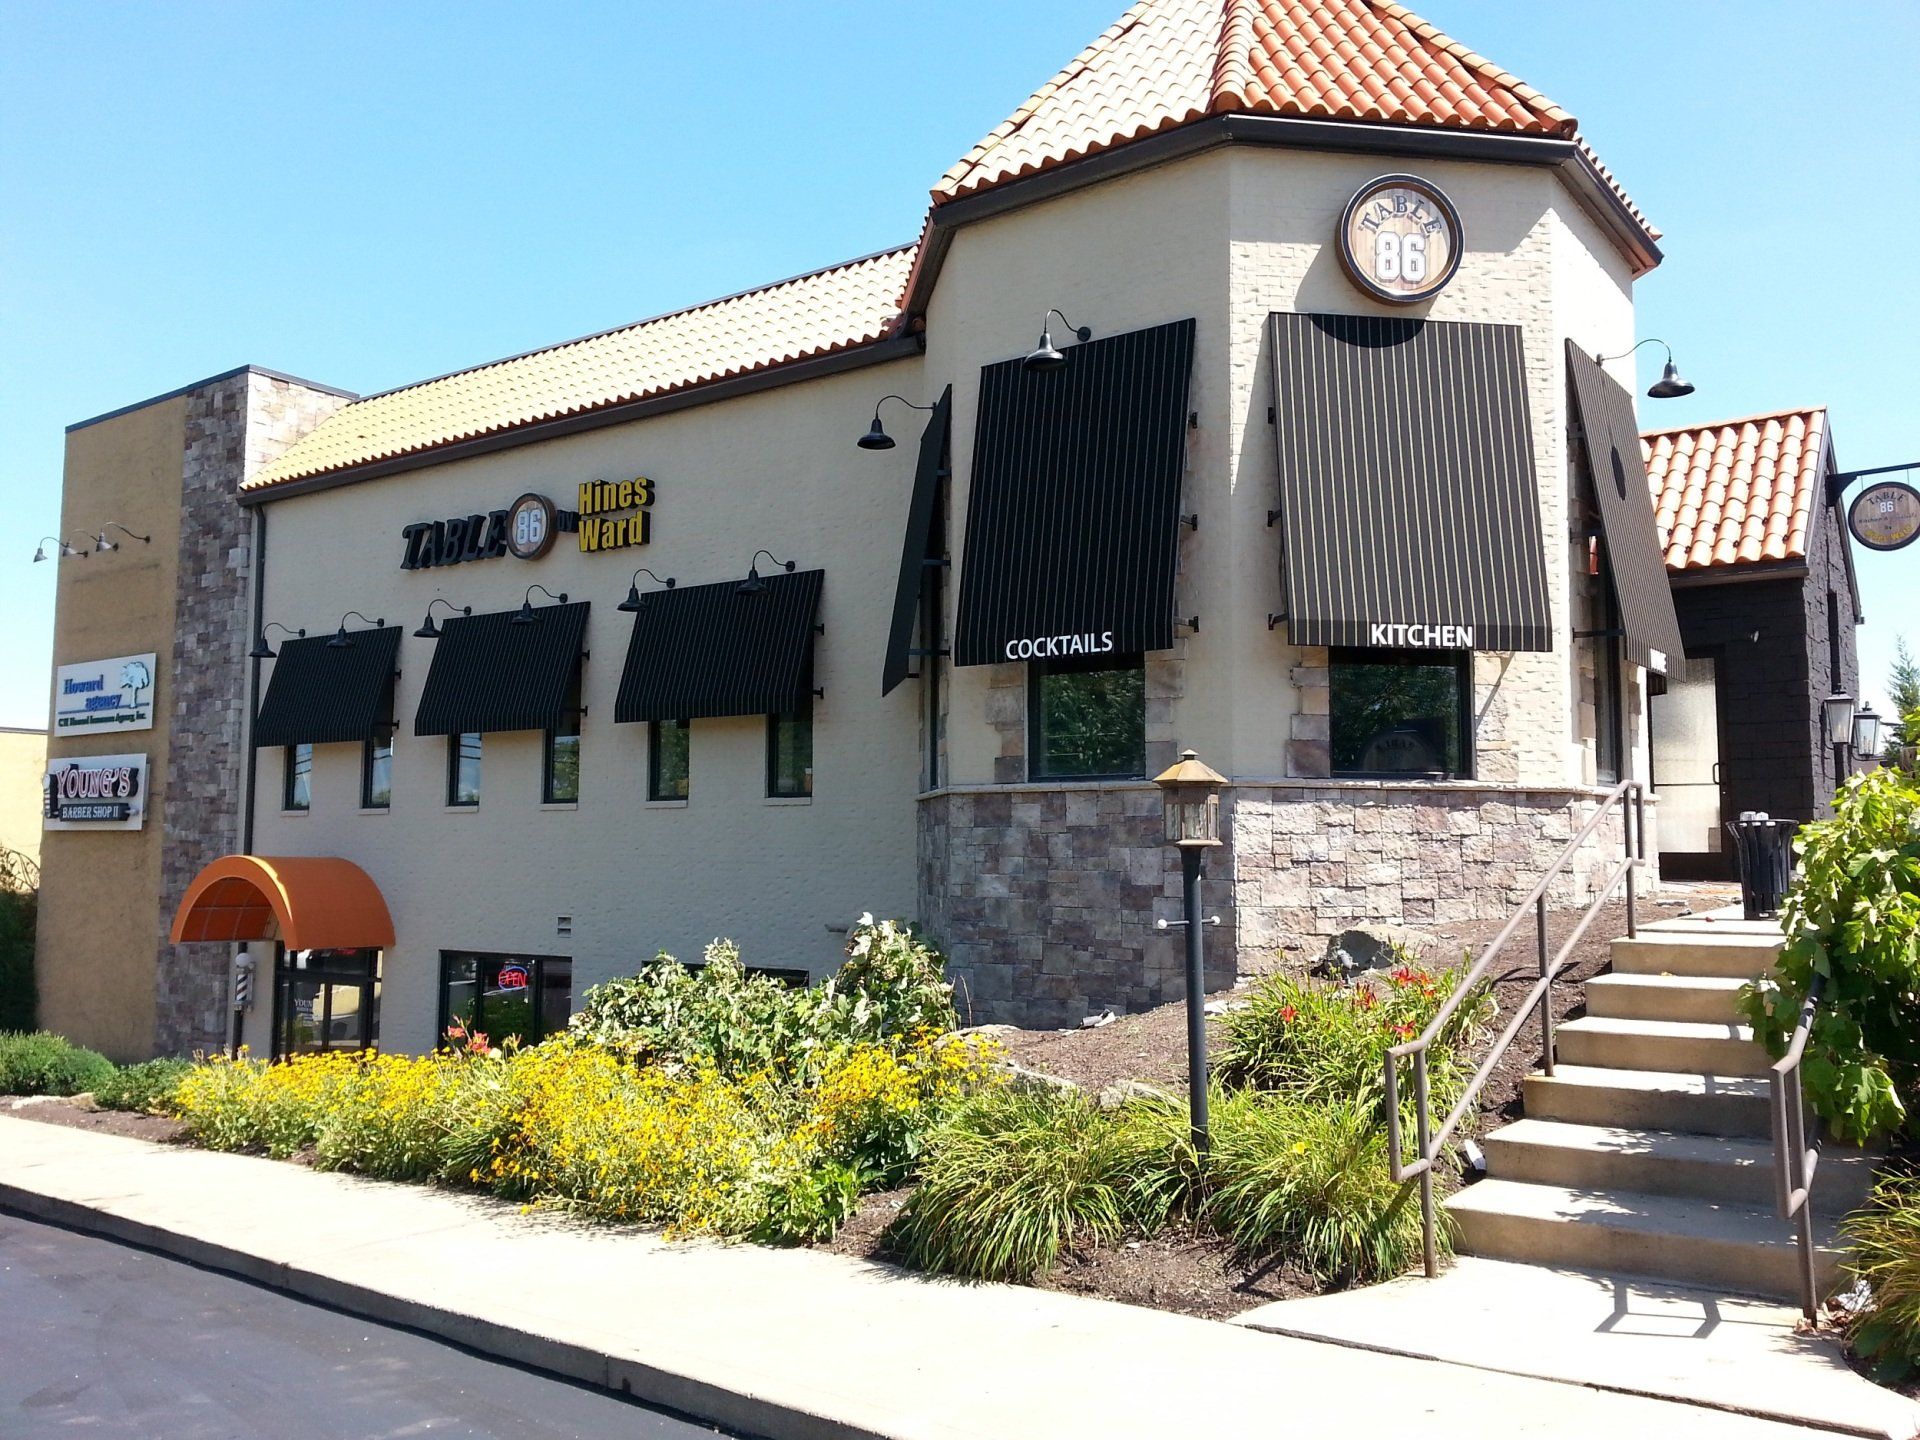 Commercial awning-61 — Custom awnings in Pittsburgh, PA